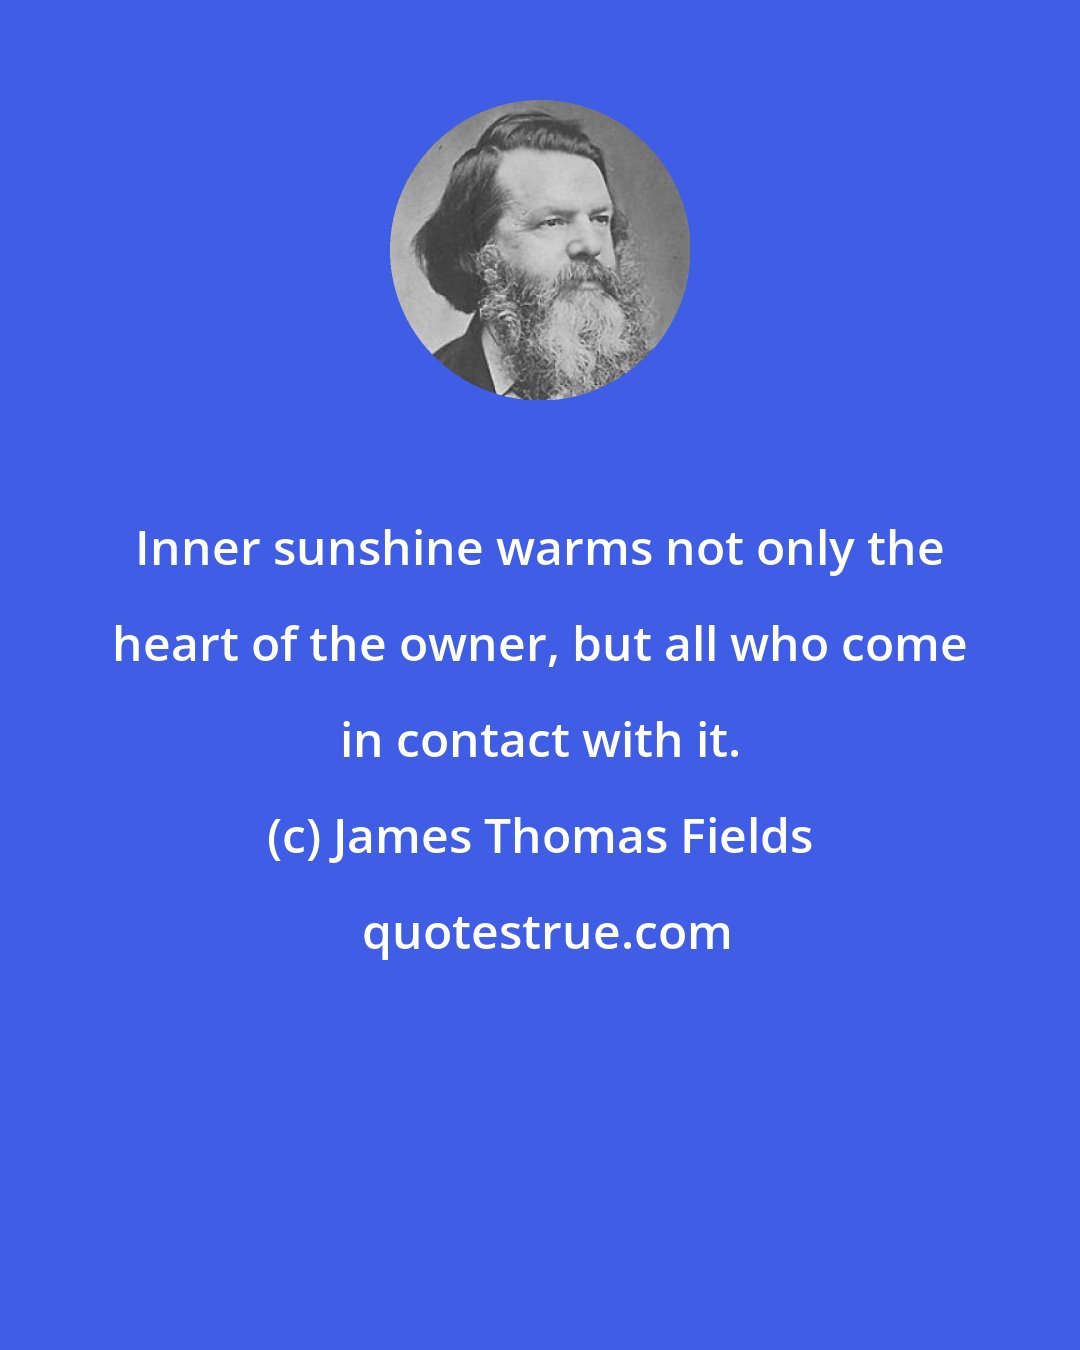 James Thomas Fields: Inner sunshine warms not only the heart of the owner, but all who come in contact with it.